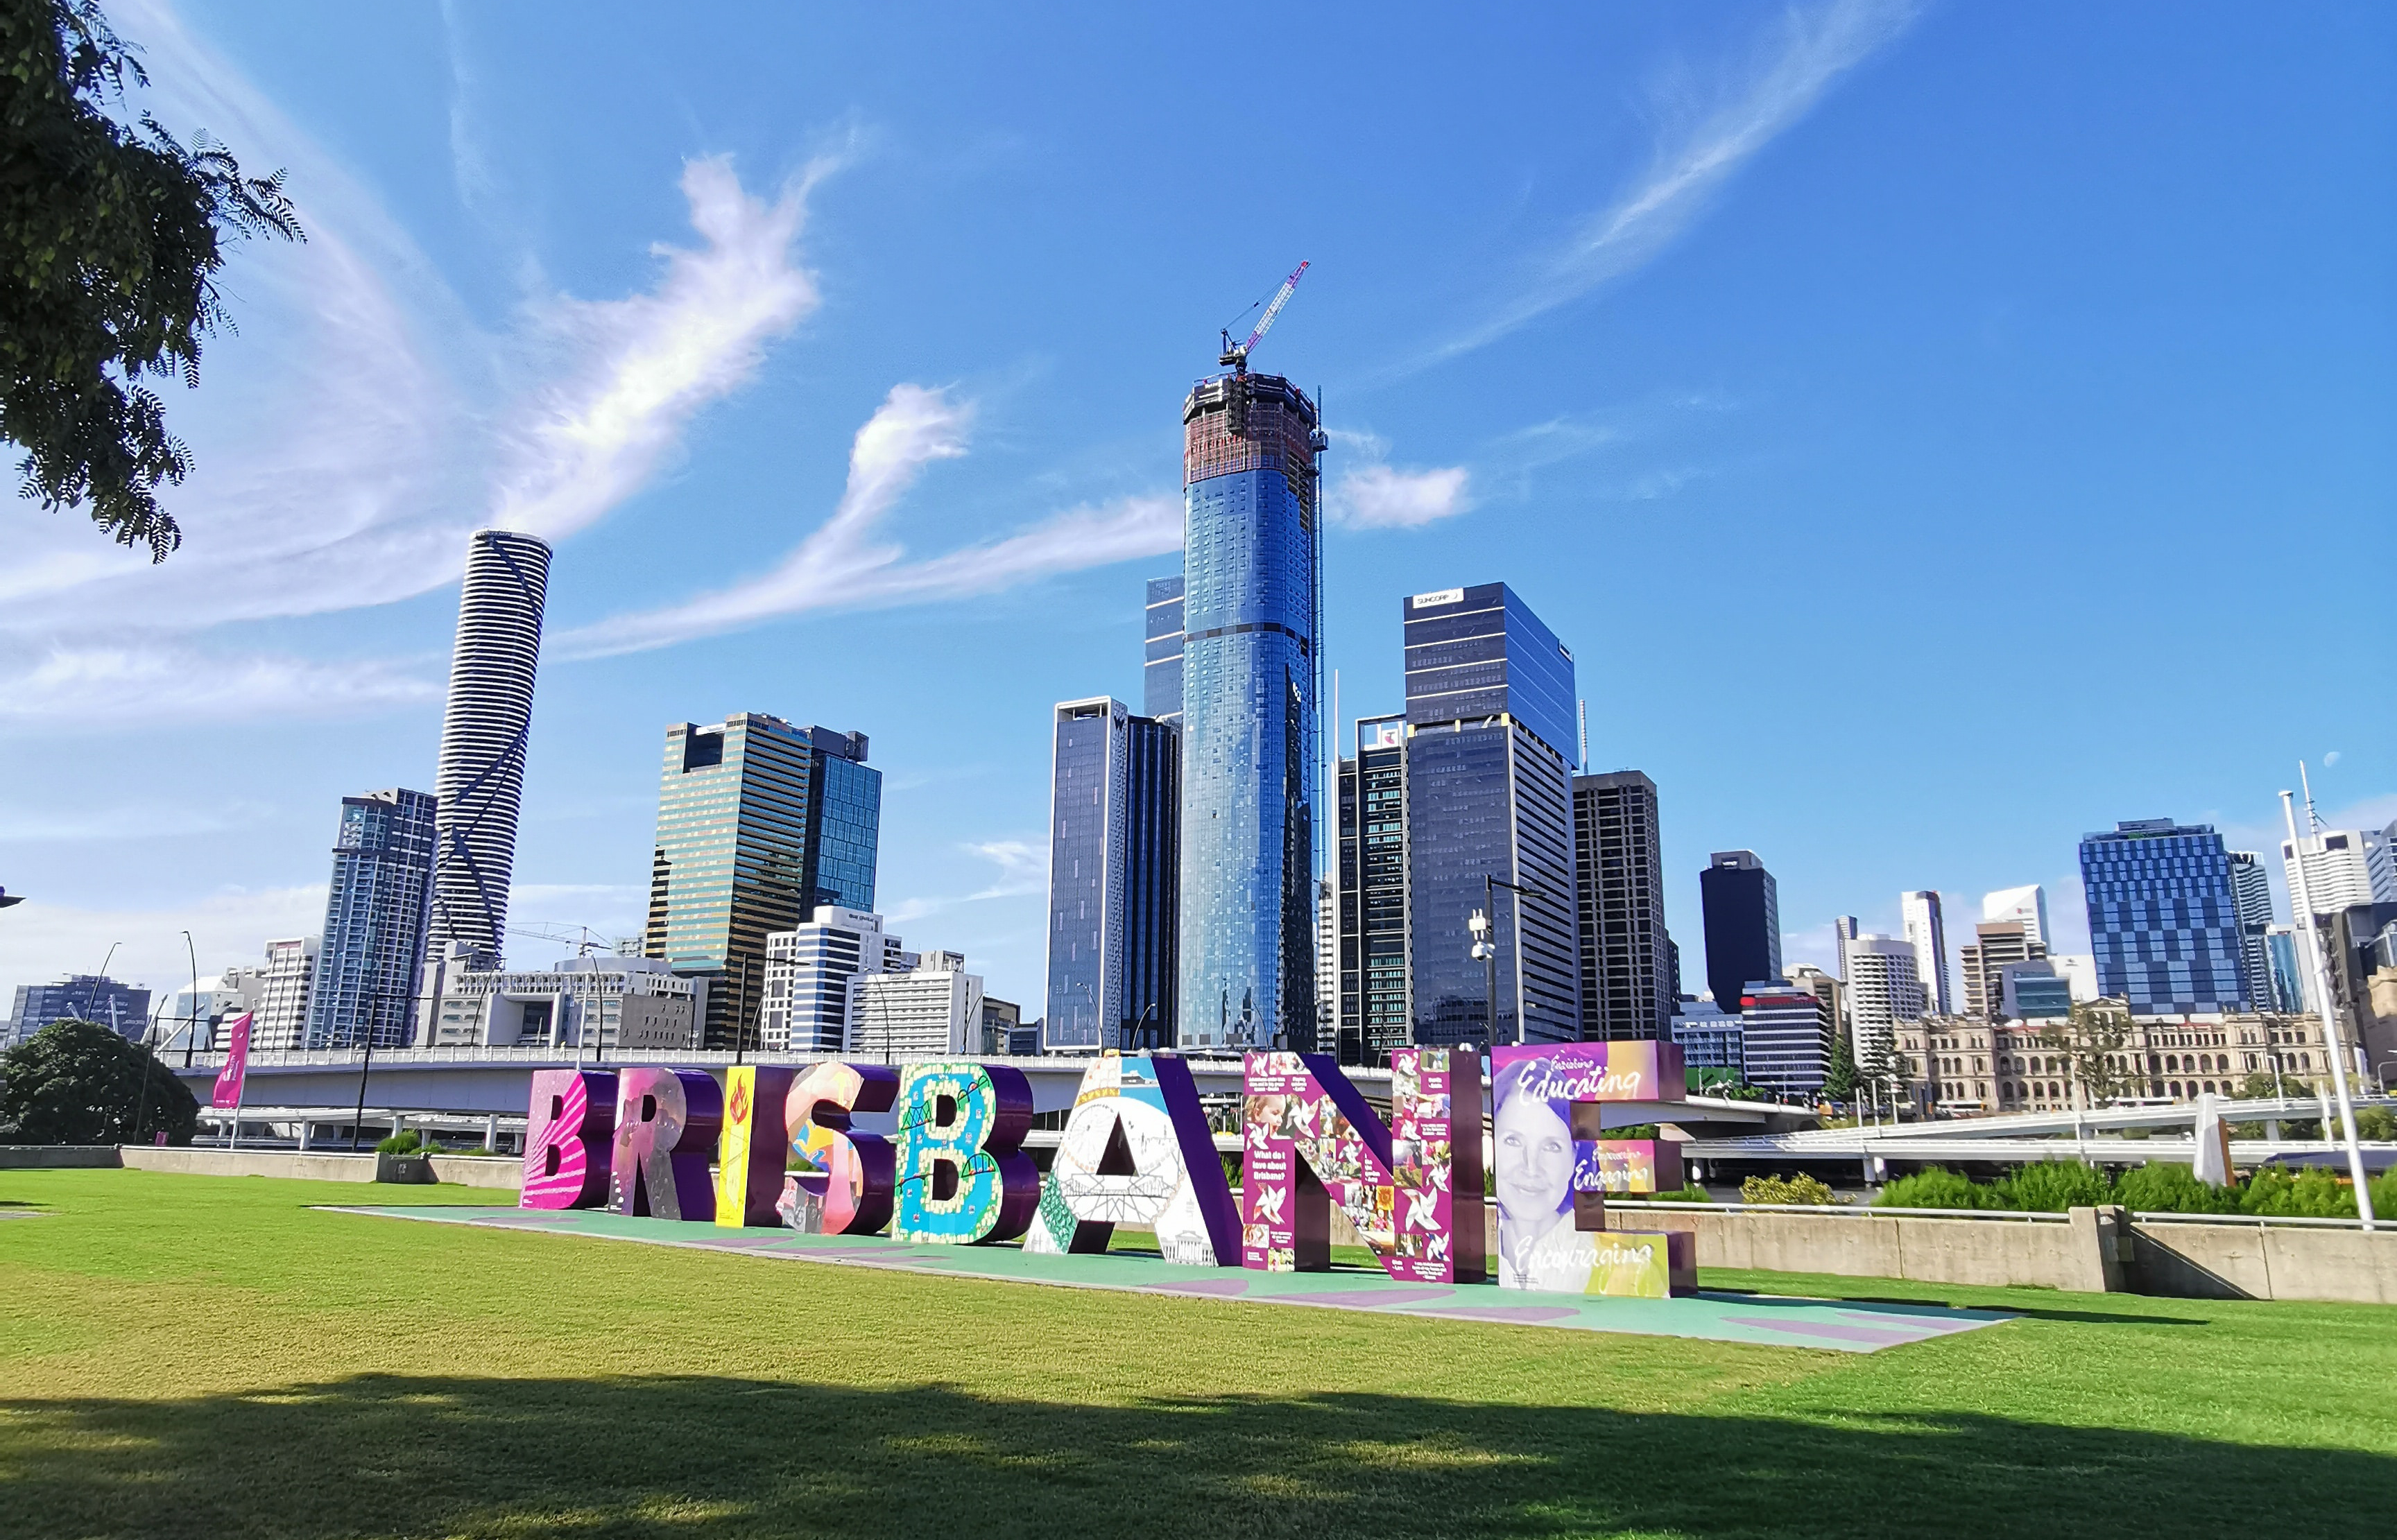 3D letters spelling Brisbane on lawn in front of Brisbane river and skyline